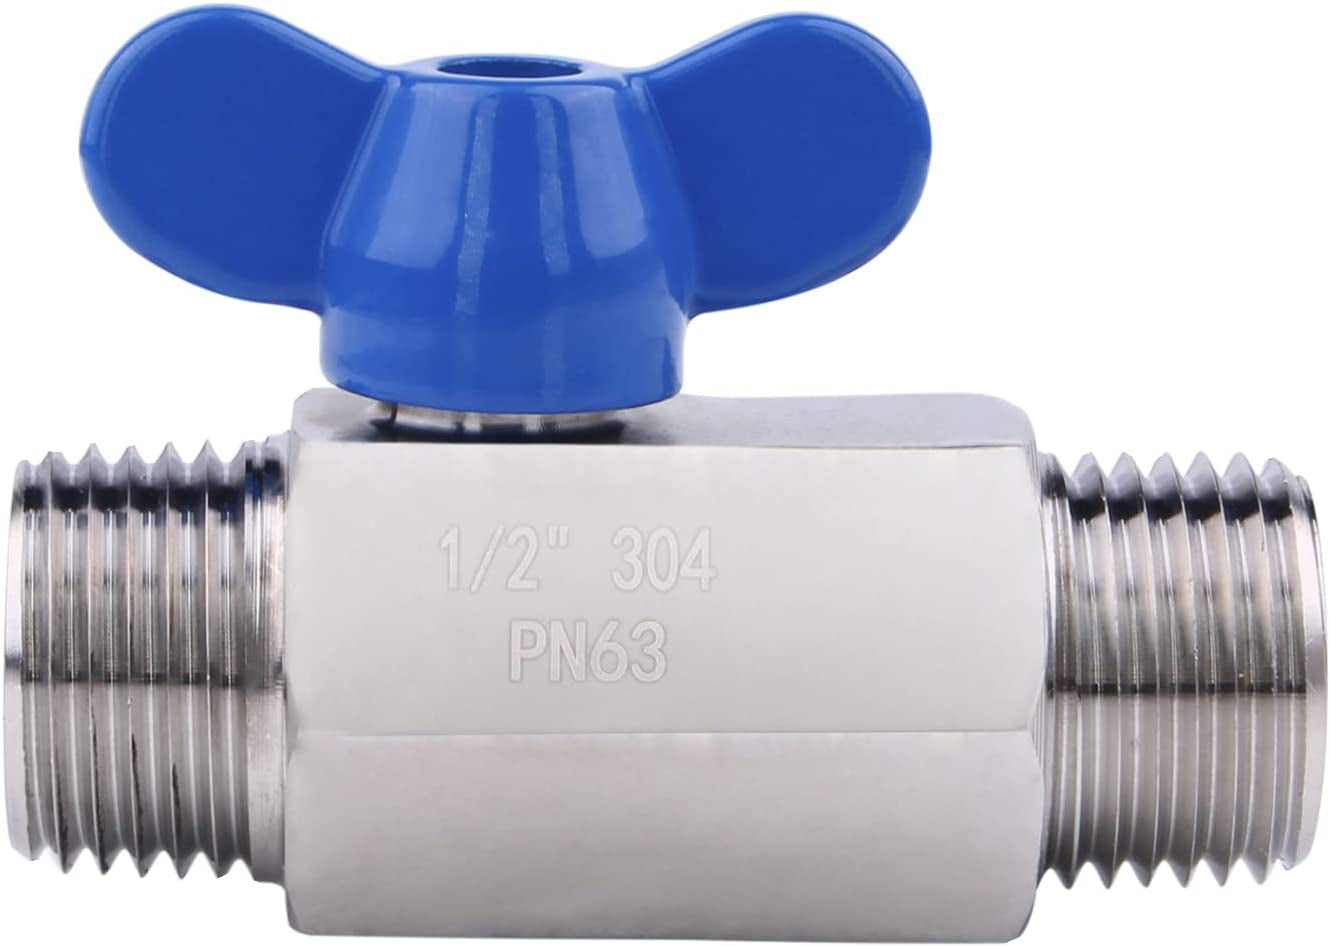 Stainless Steel Ball Valve - 1/2 Inch NPT Thread Male Small Mini Ball Valve (1/2" Male&Male)